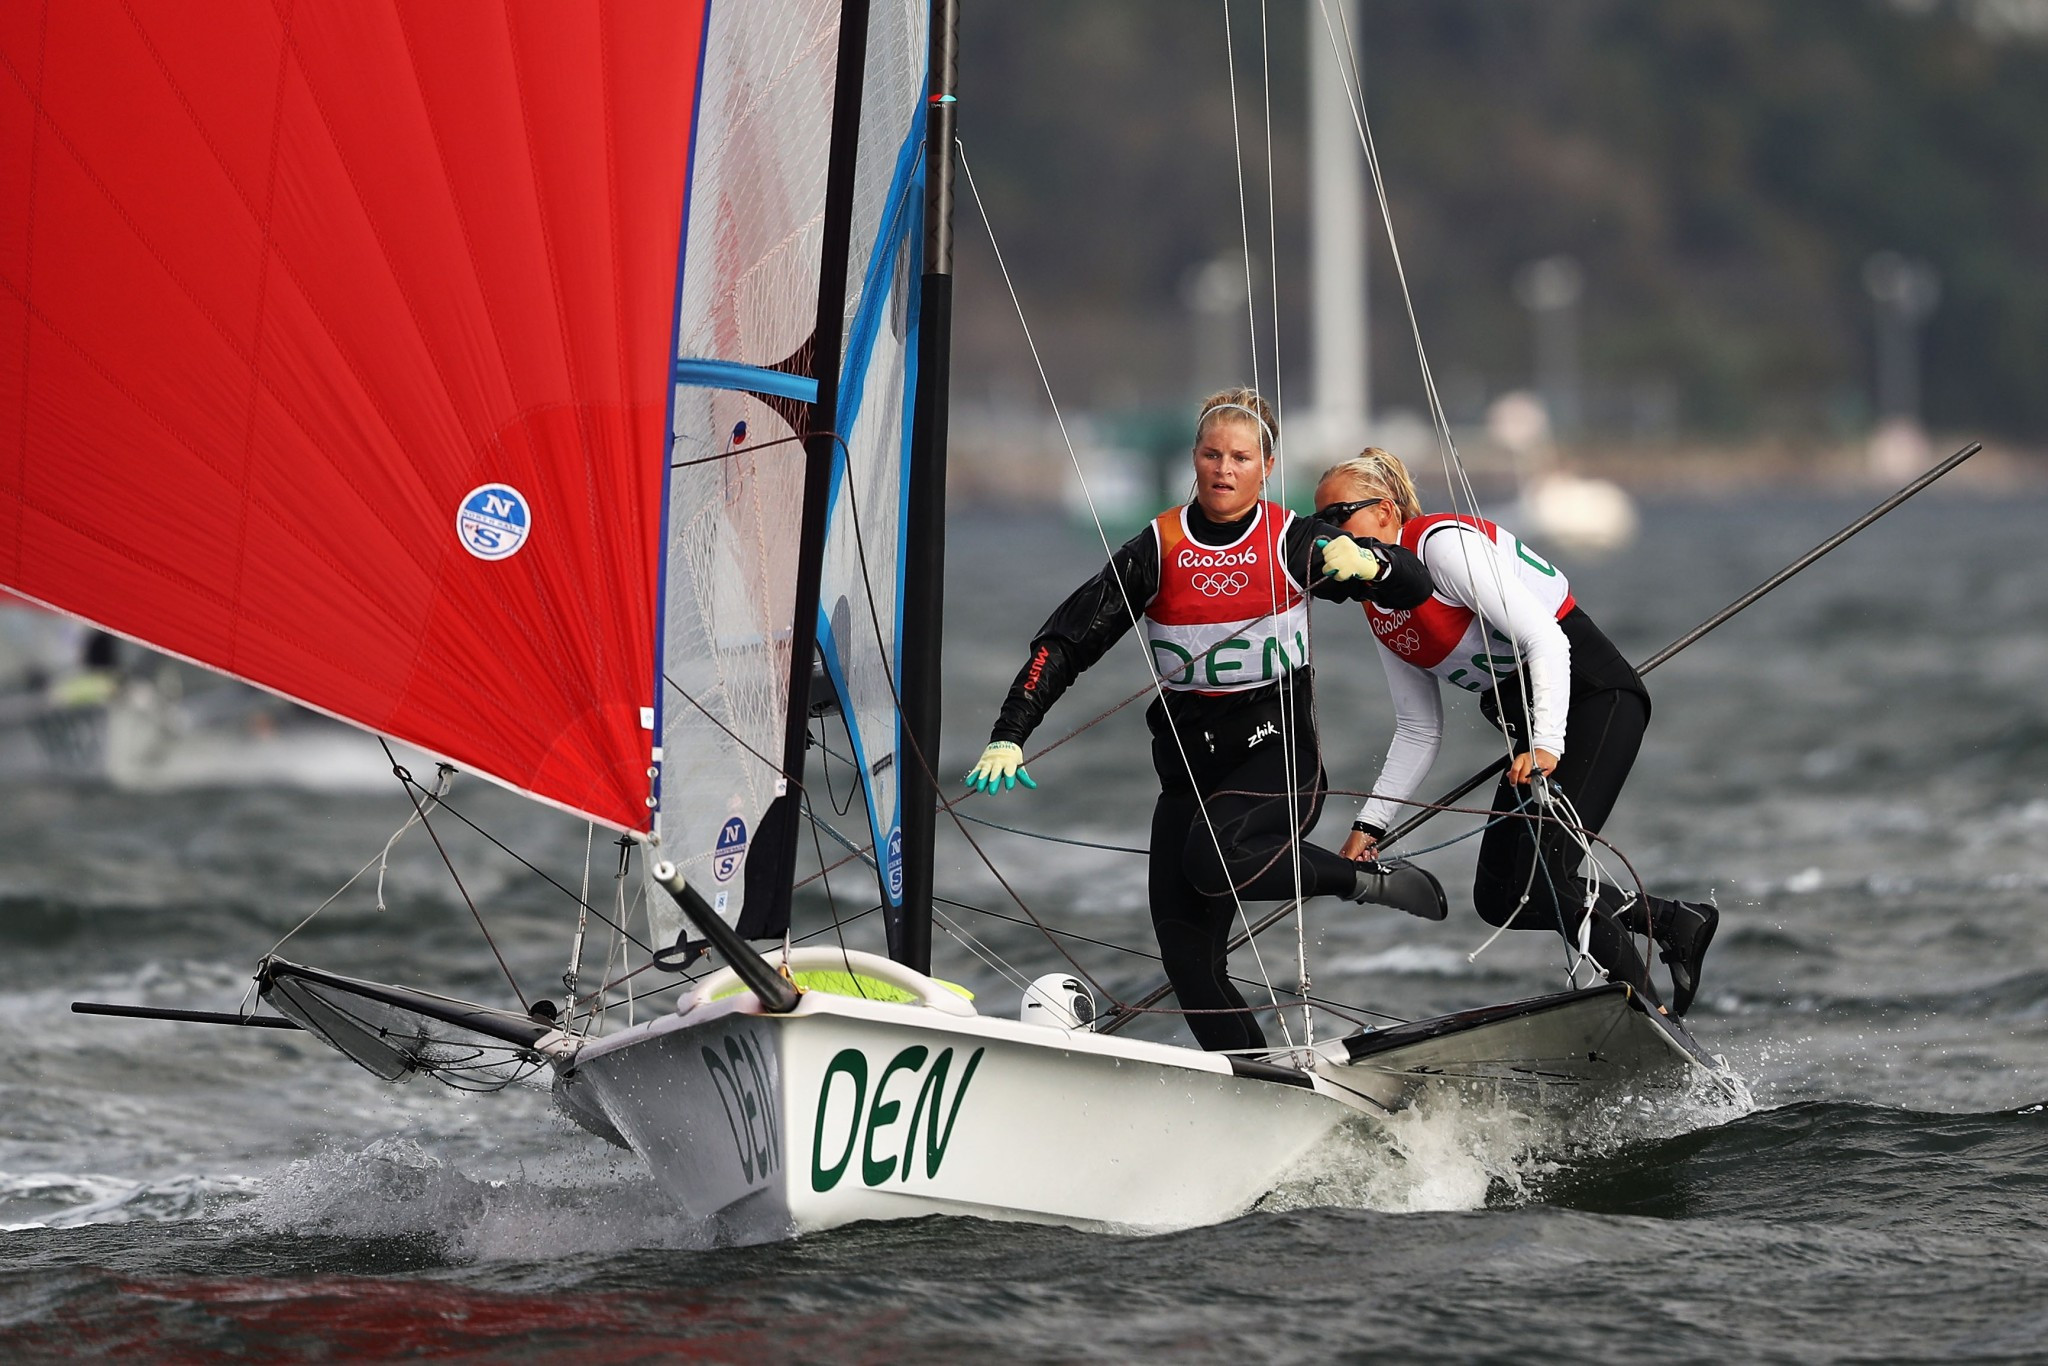 Danish duo continue to lead at home World Sailing Championships test event